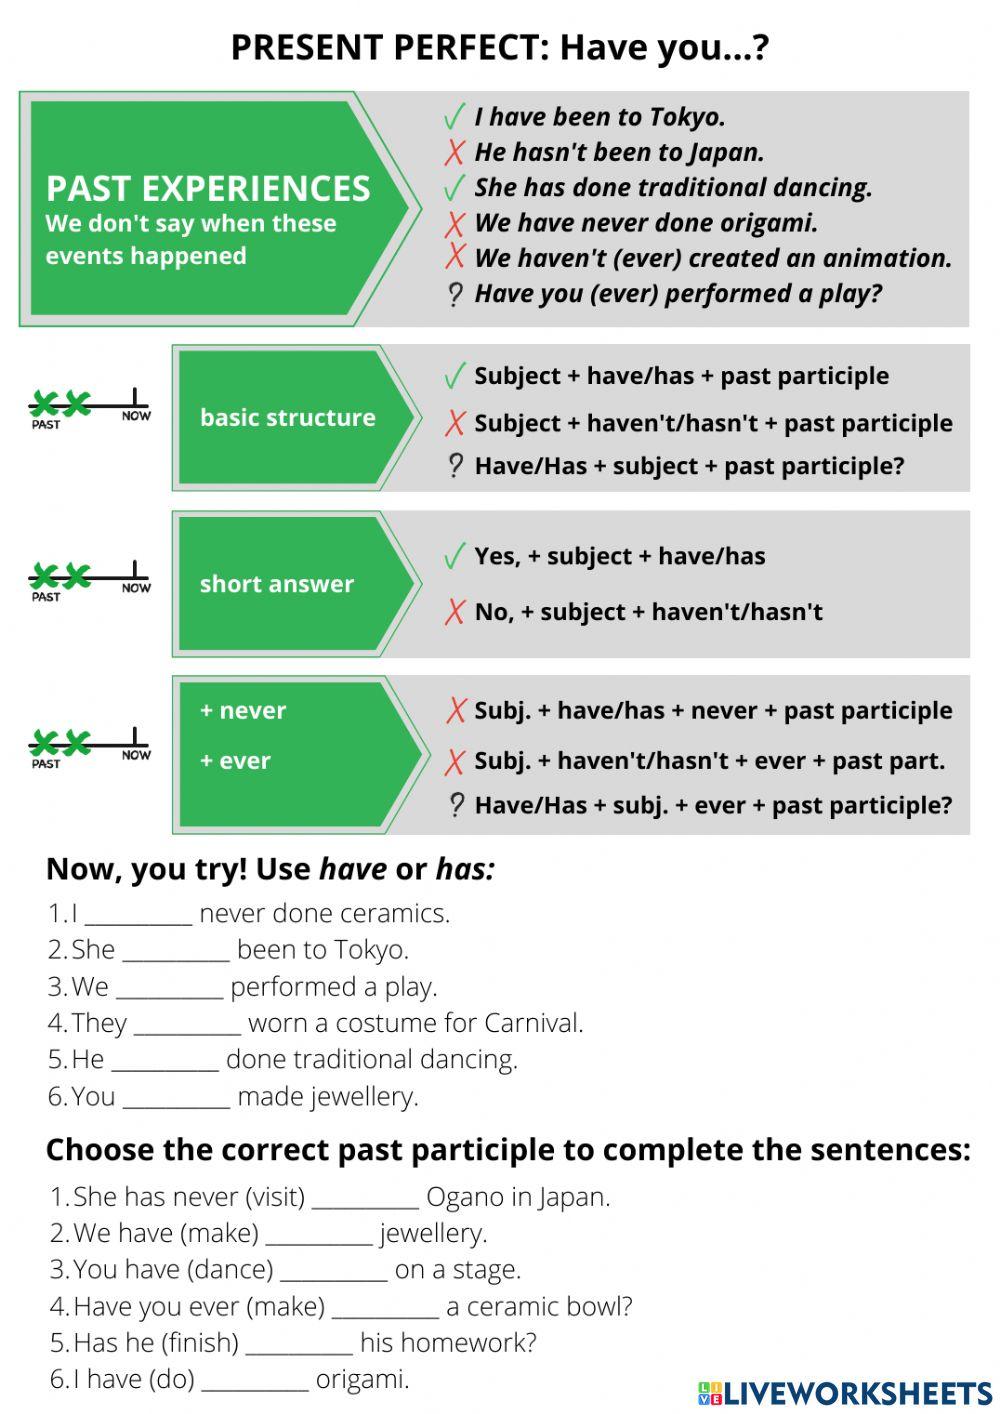 Present Perfect: Have you...?